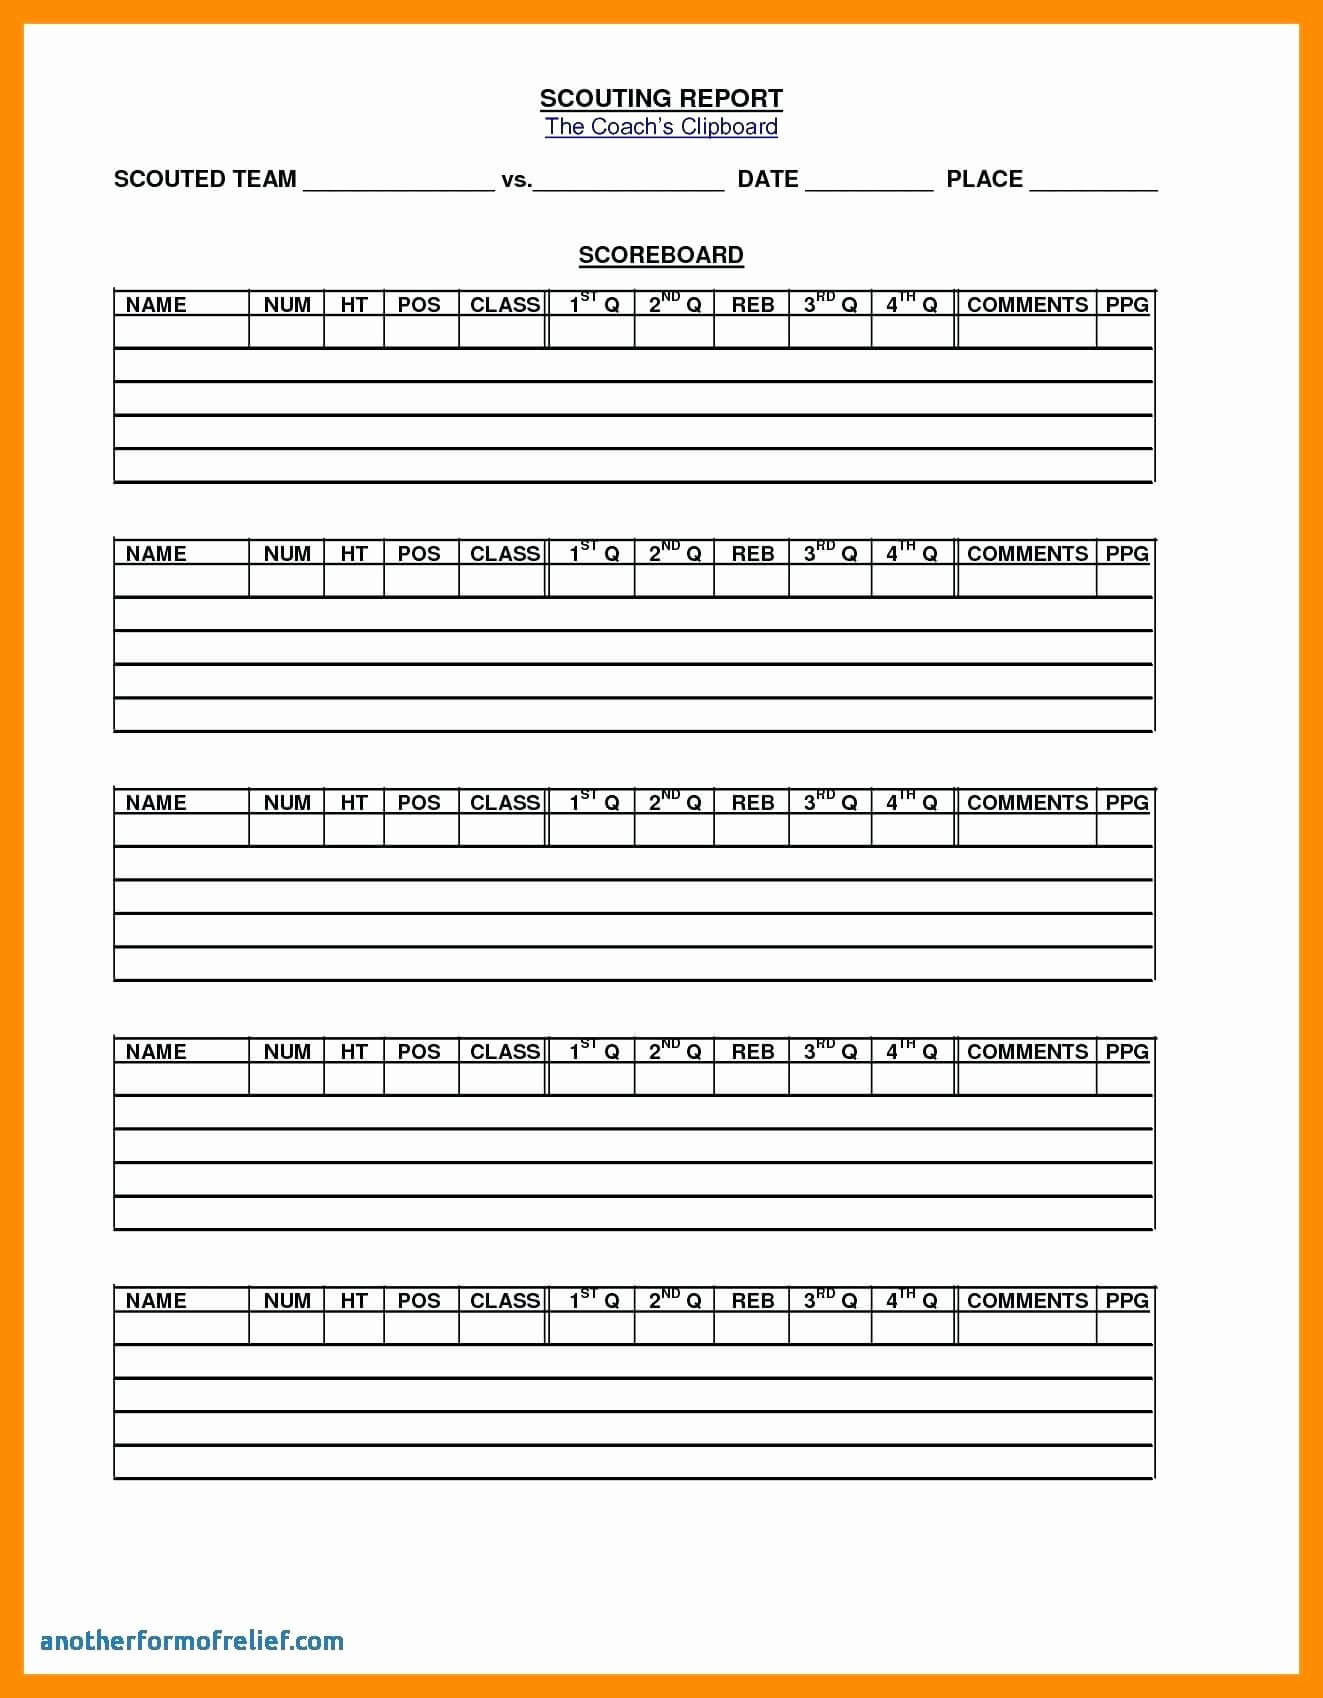 2E6D Basketball Scouting Report Template Sheets For Basketball Scouting Report Template